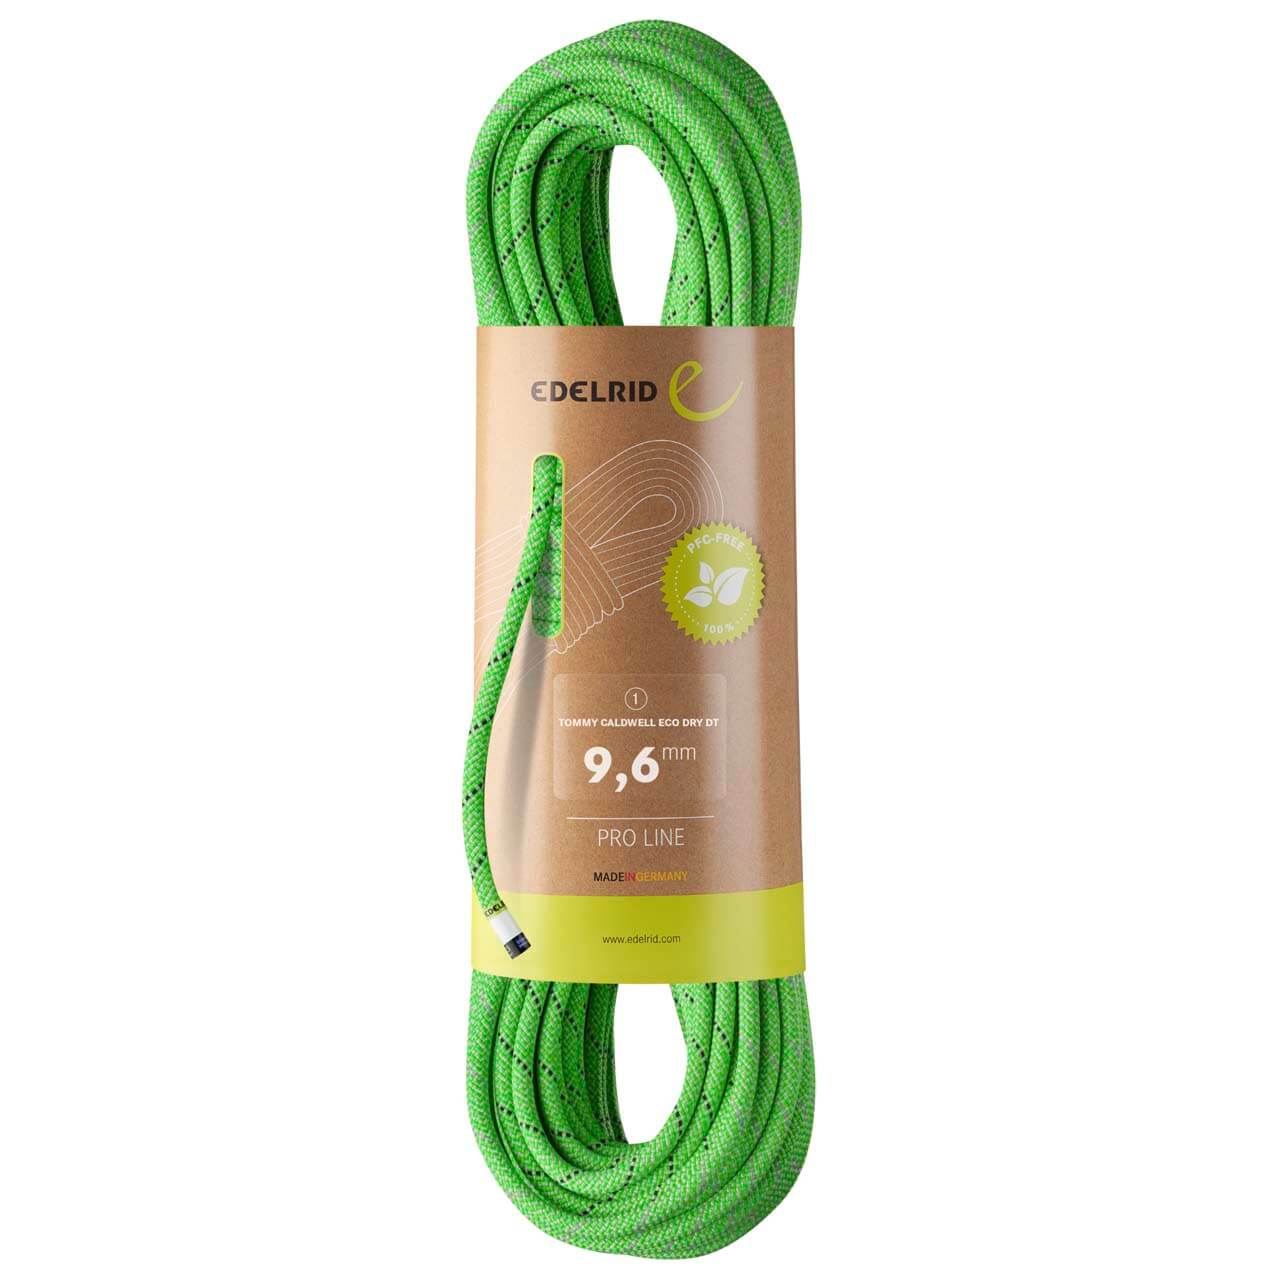 Edelrid Tommy Caldwell Eco Dry DT - Neon Green, 60 m